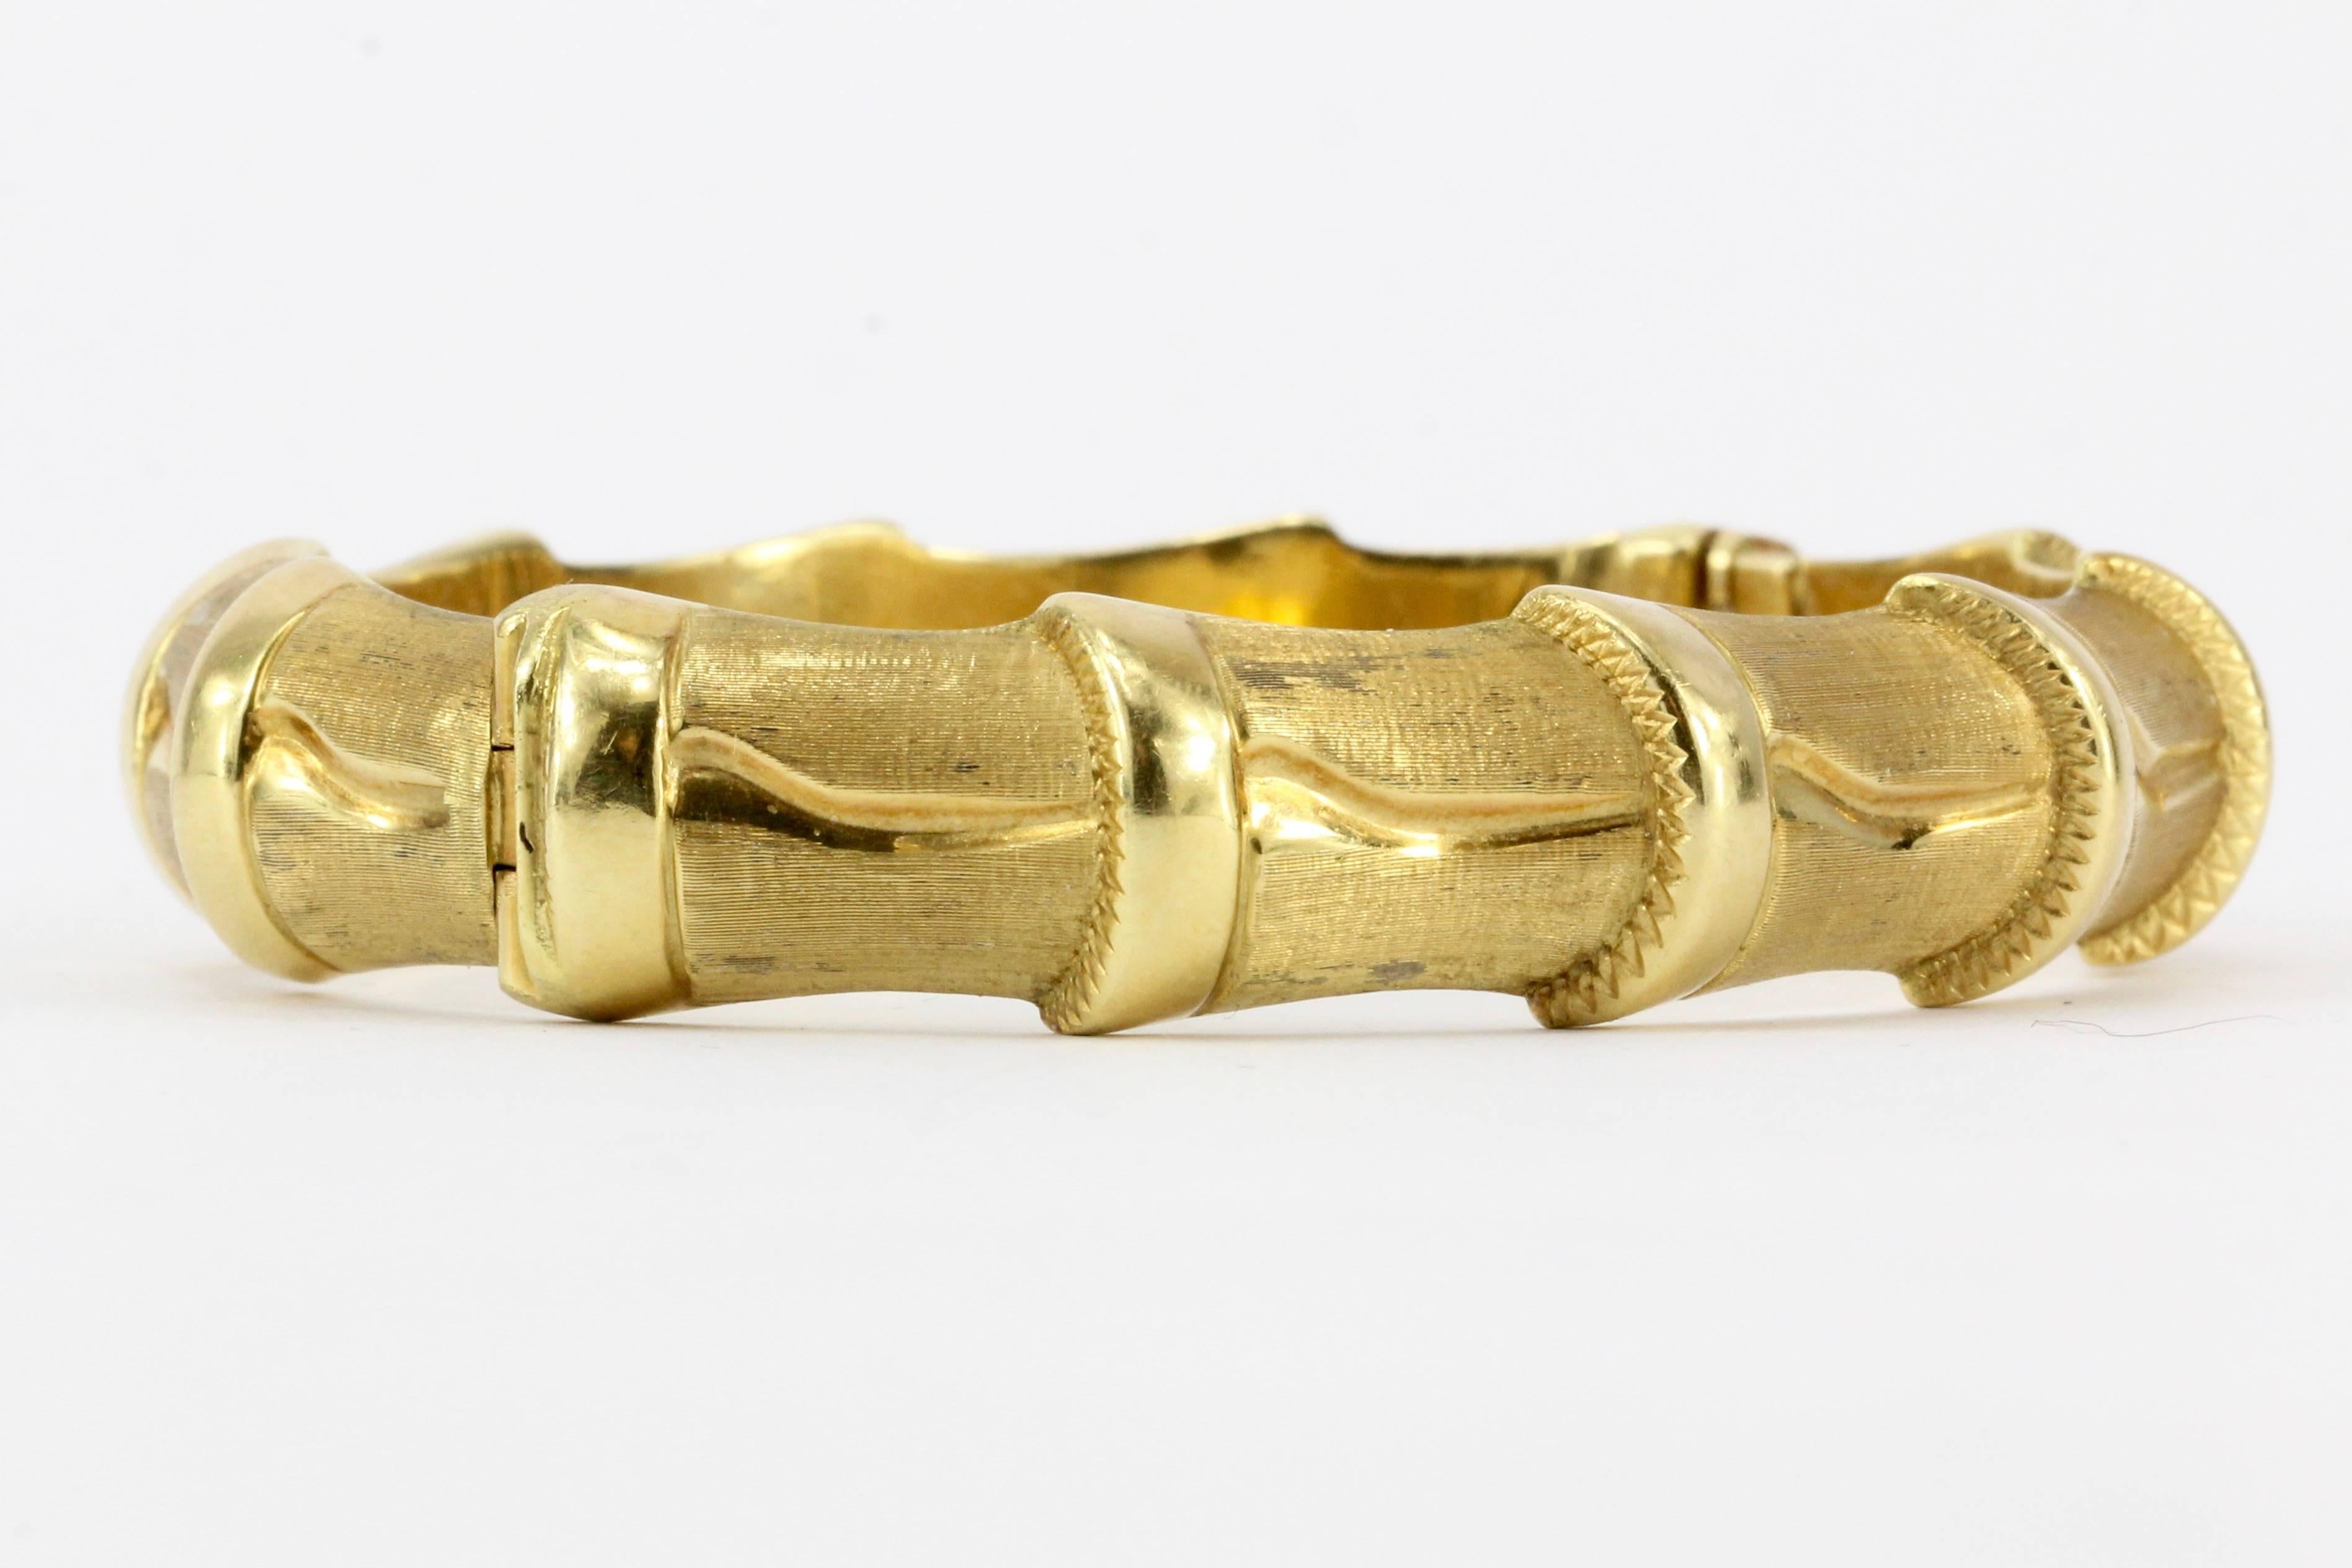 Era: Retro 1950's

Composition: 18K Yellow Gold 

Hallmarks: 750 Italy

Bracelet Bangle dimensions: inner diameter 7"

Bracelet Weight: 36.1 grams

Bracelet Condition: Excellent Estate Condition, Ready to Wear